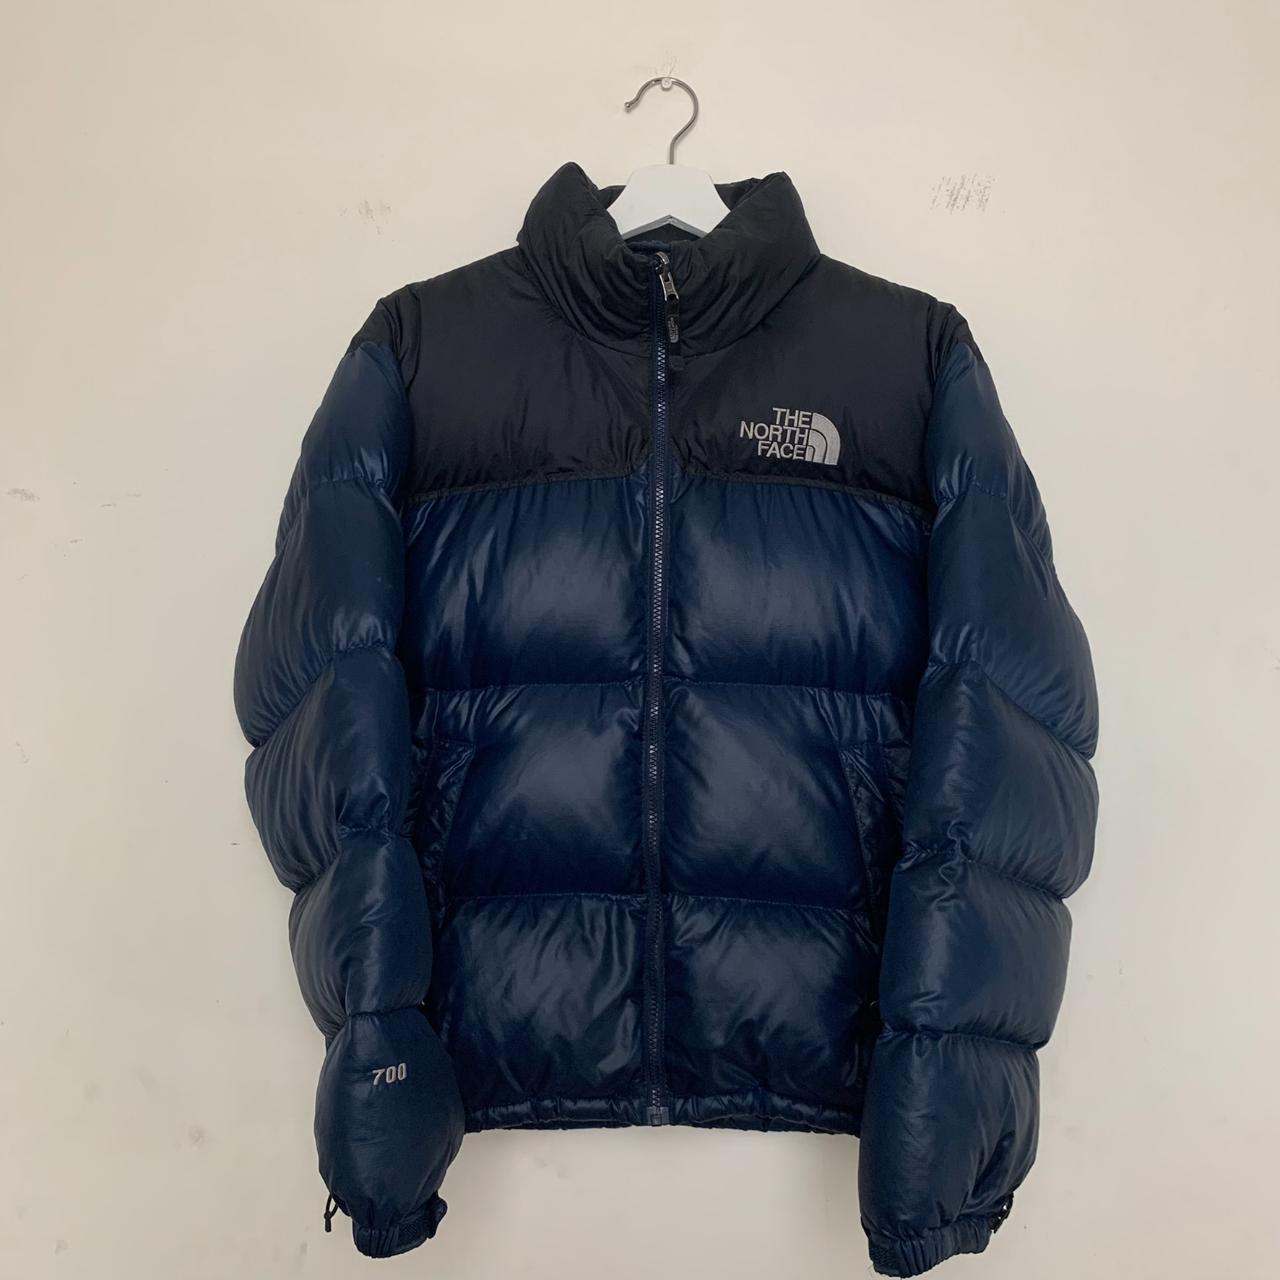 The North Face Men's Blue and Navy | Depop